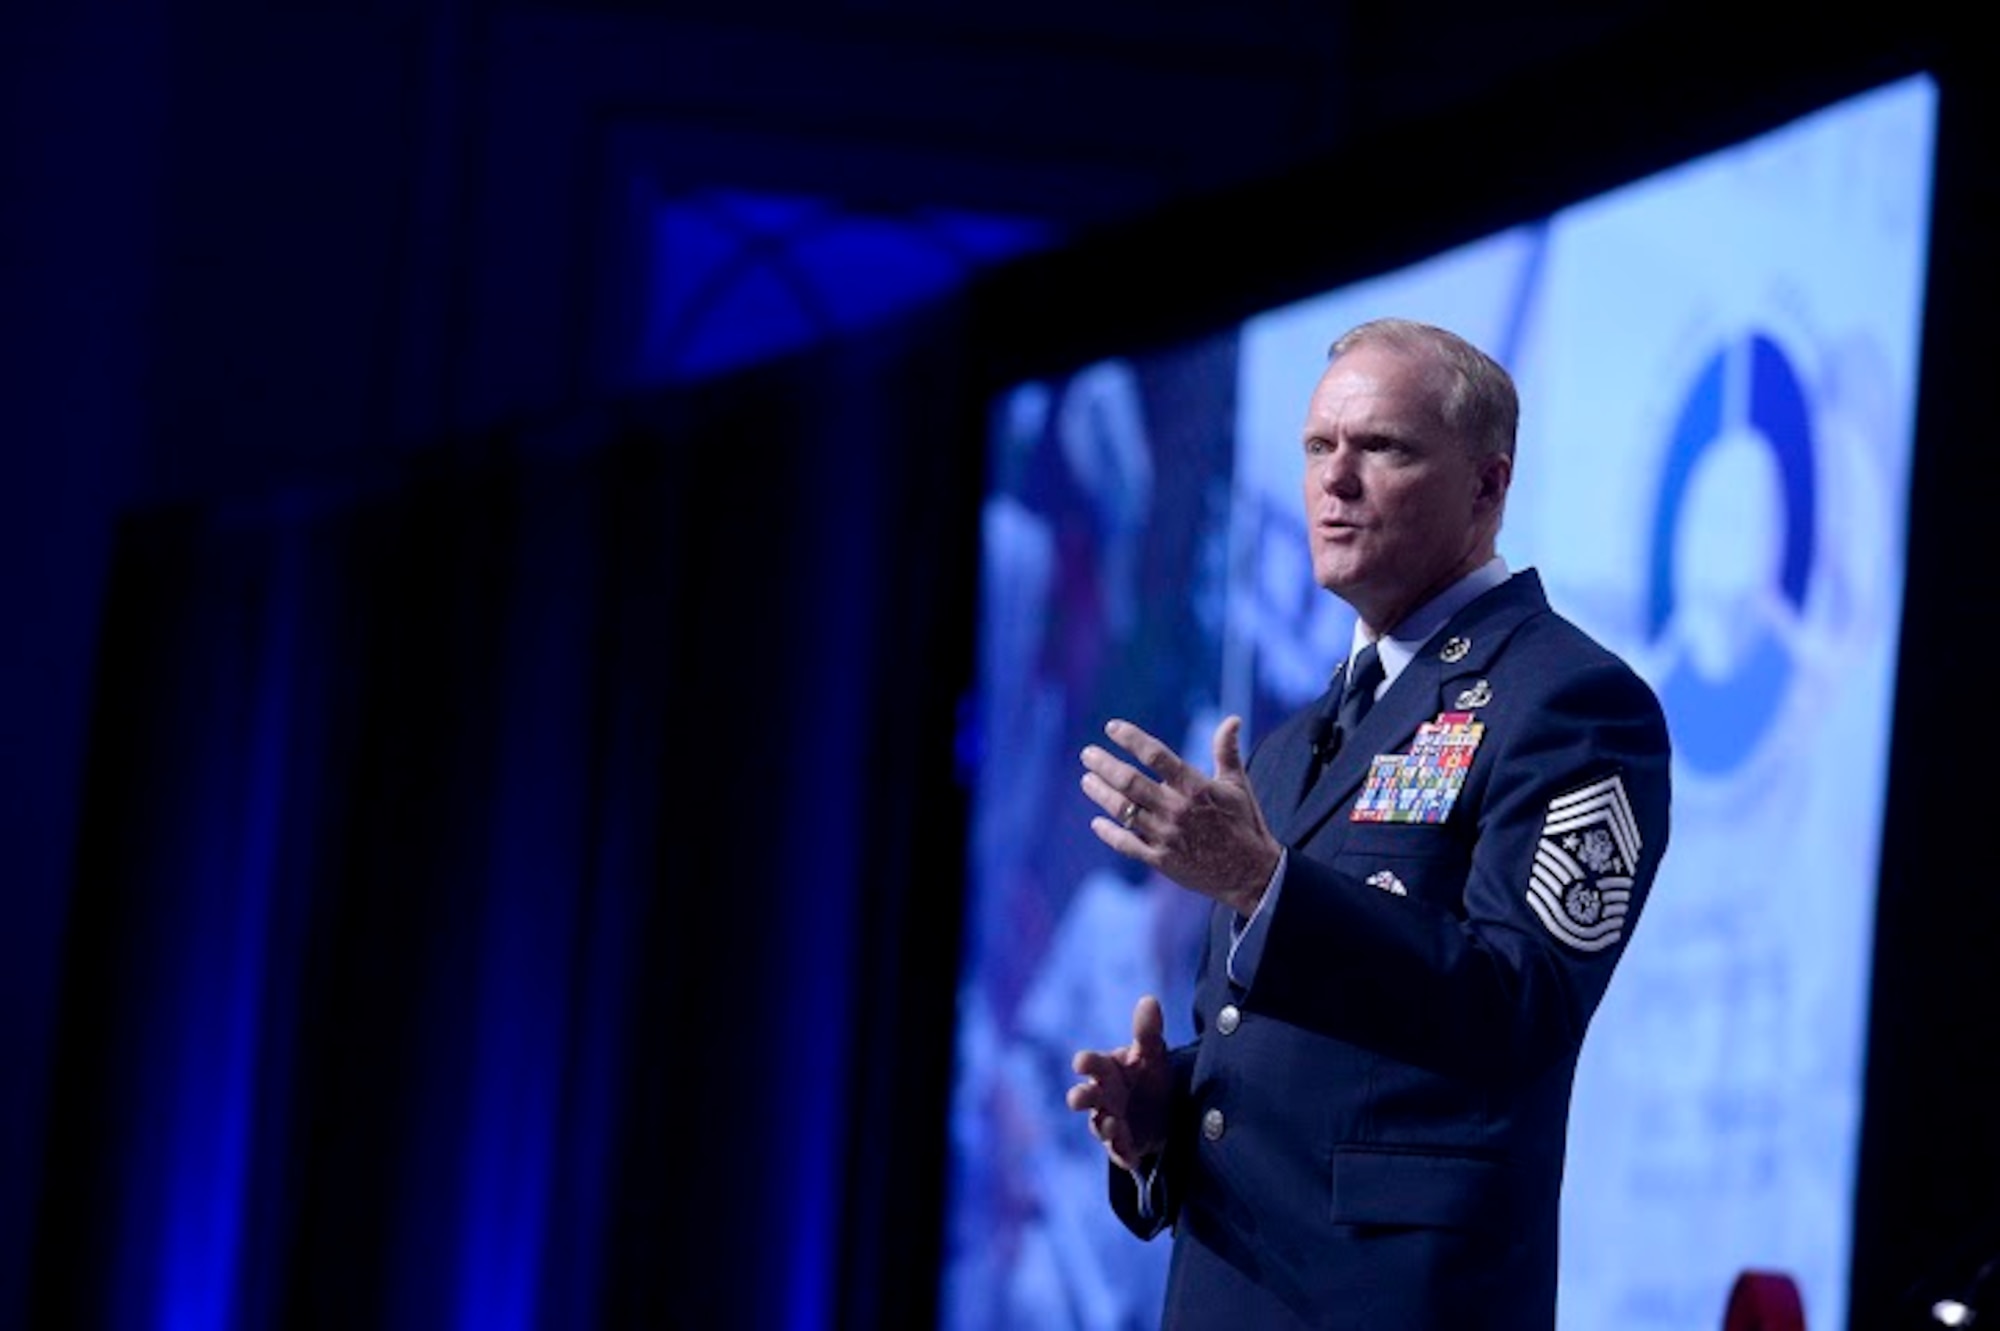 Chief Master Sgt. of the Air Force James A. Cody gives his Enlisted Force Update at the Air Force Association's Air and Space Conference and Technology Exposition Sept. 16, 2015, in Washington, D.C. (U.S. Air Force photo/Scott M. Ash)  